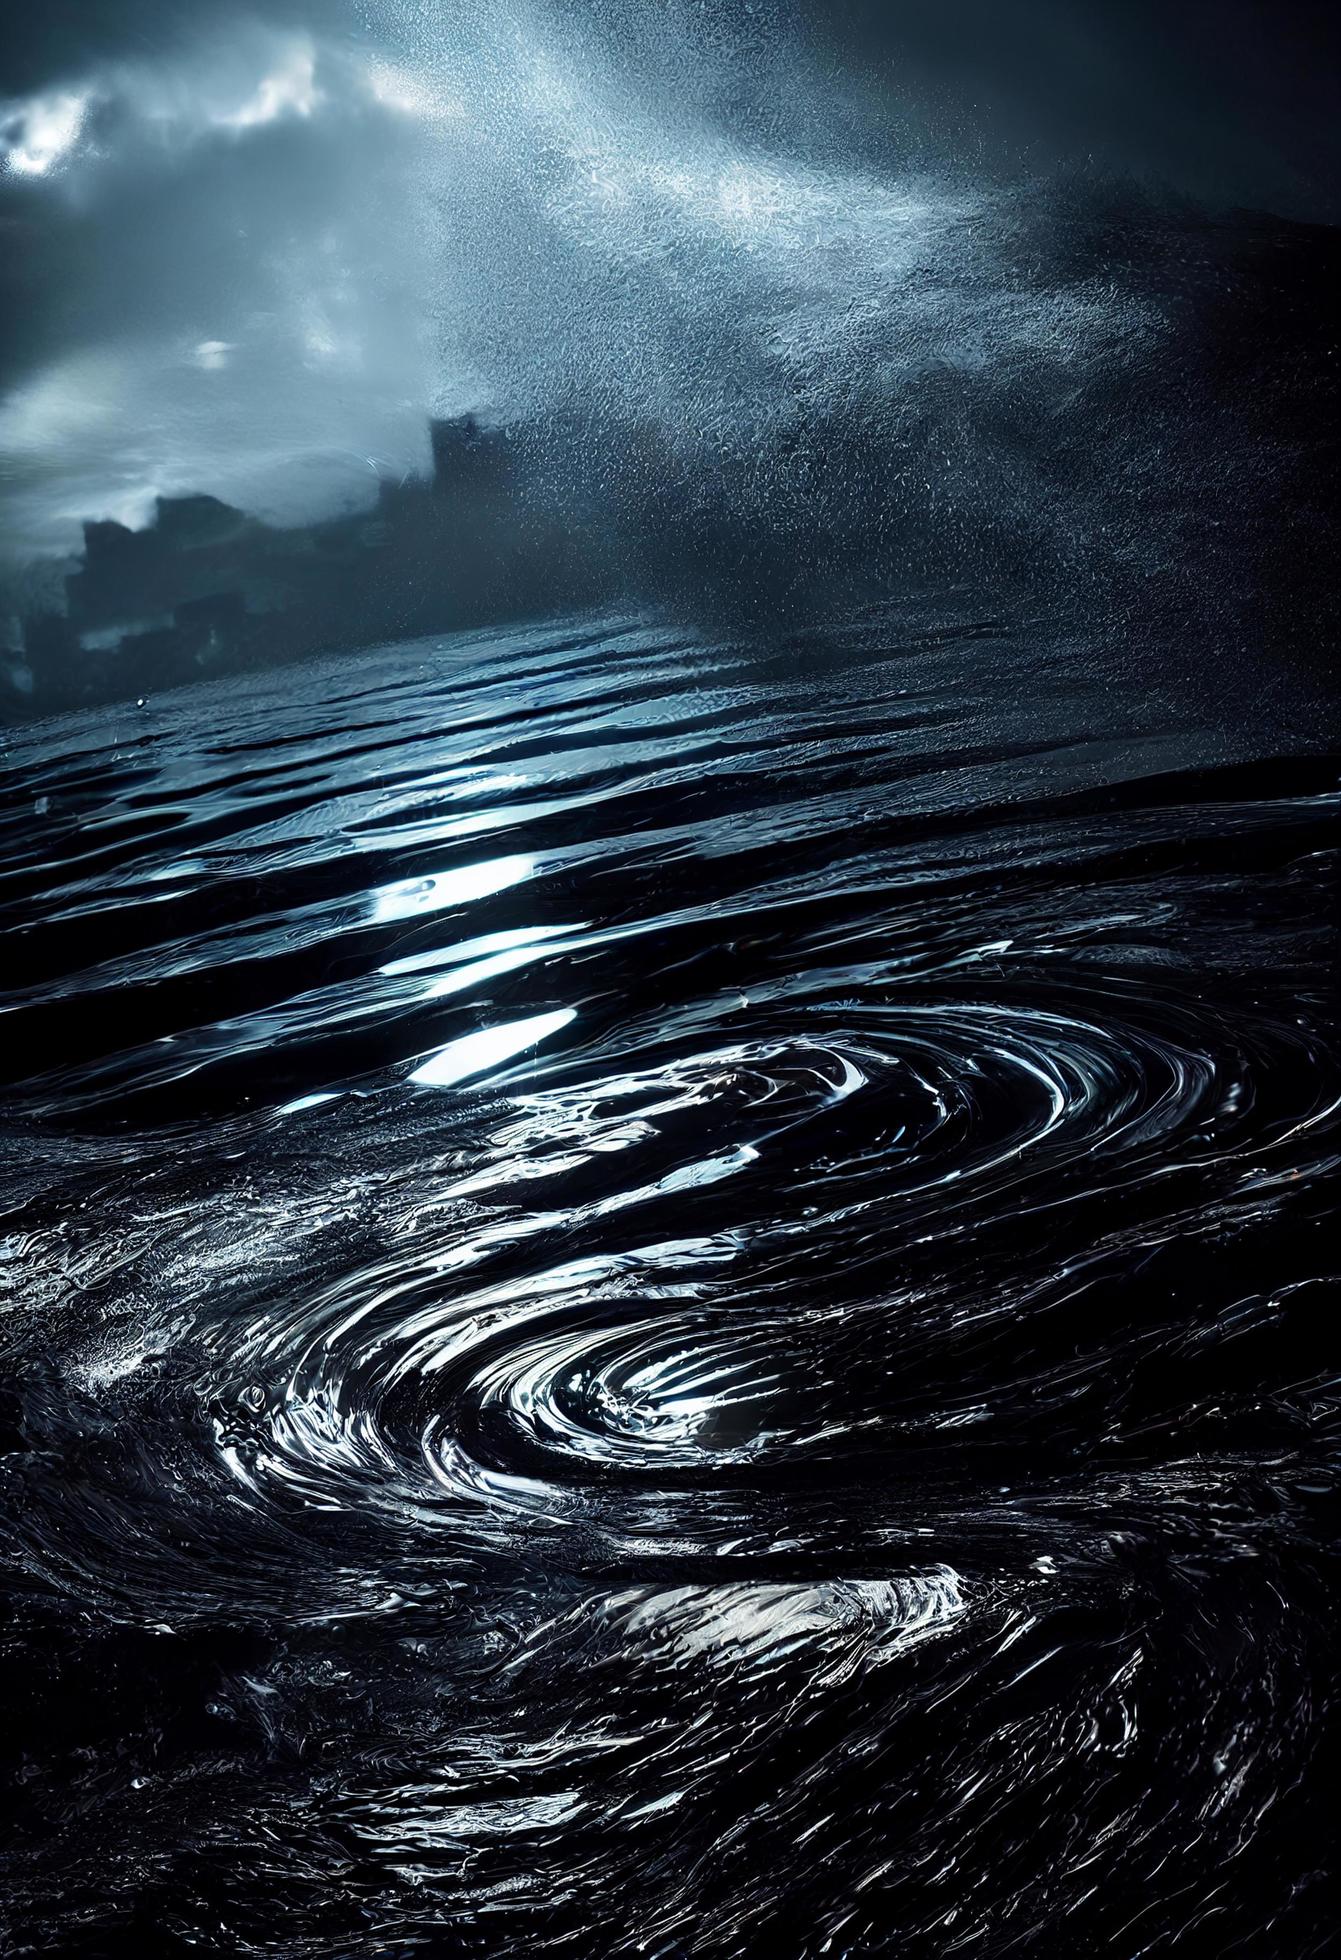 https://static.vecteezy.com/system/resources/previews/013/677/941/large_2x/a-water-vortex-dark-water-storm-horror-scarry-free-photo.jpg